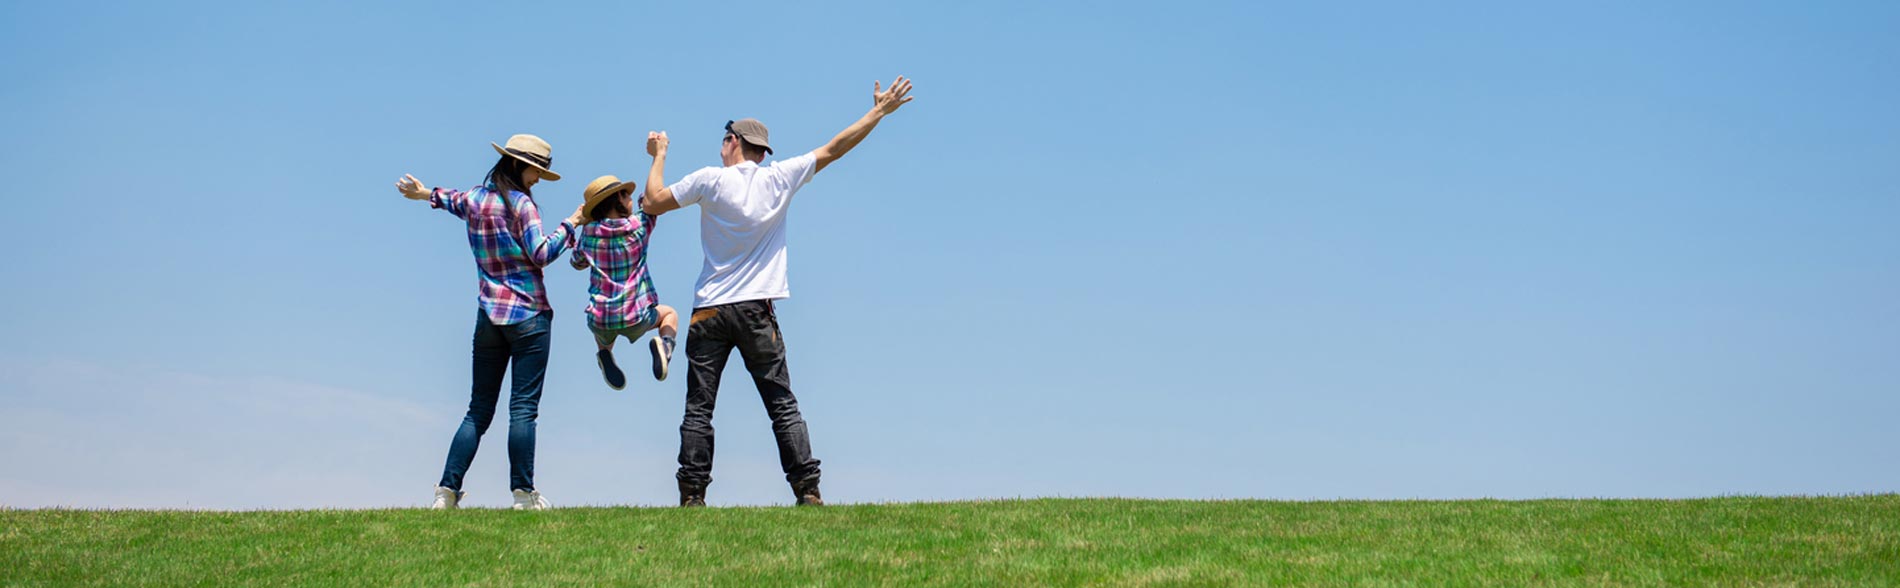 Two parents swing their child in the air on a grassy hill